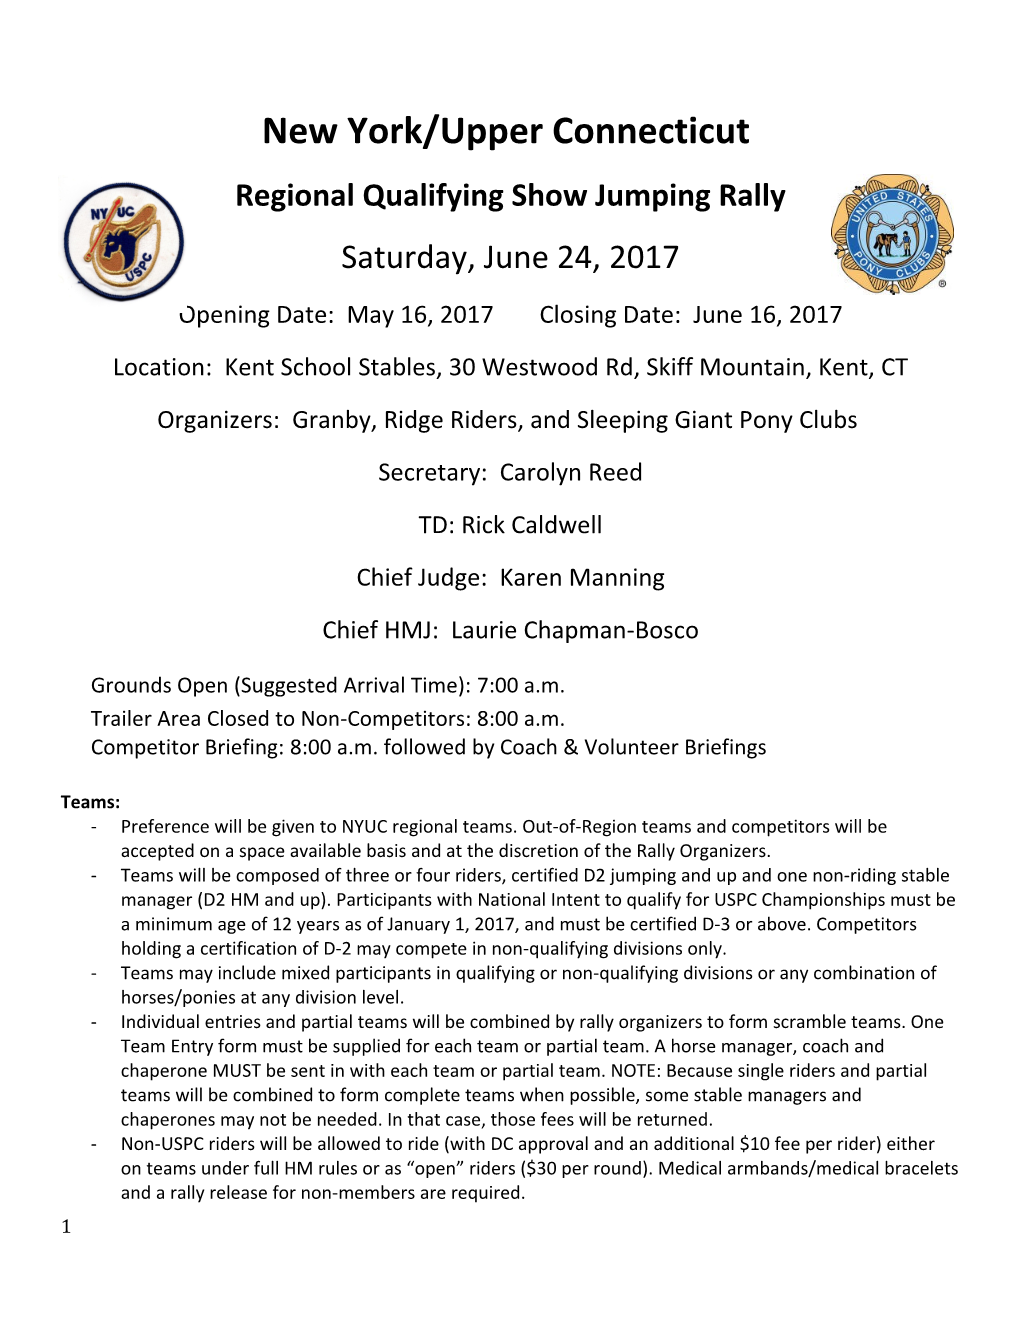 Regional Qualifying Show Jumping Rally